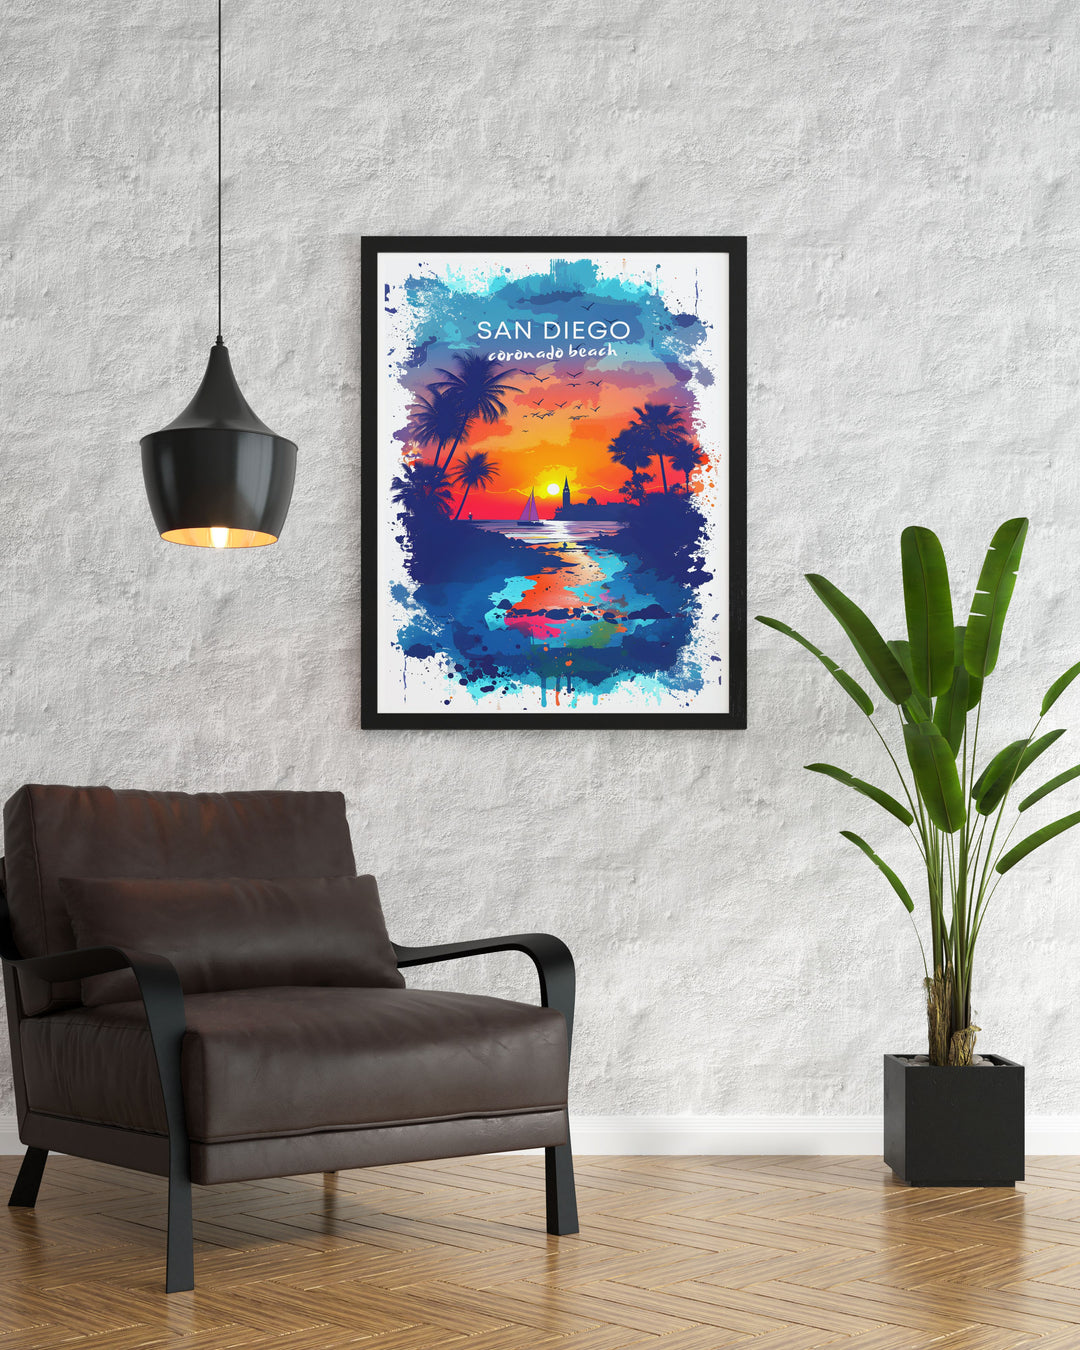 Enhance your home with our Coronado Prints featuring the iconic Vail Ski slopes and the mesmerizing hues of a Sunset. These prints are crafted to bring a touch of Coronados natural wonder into your living space with stunning clarity and color.